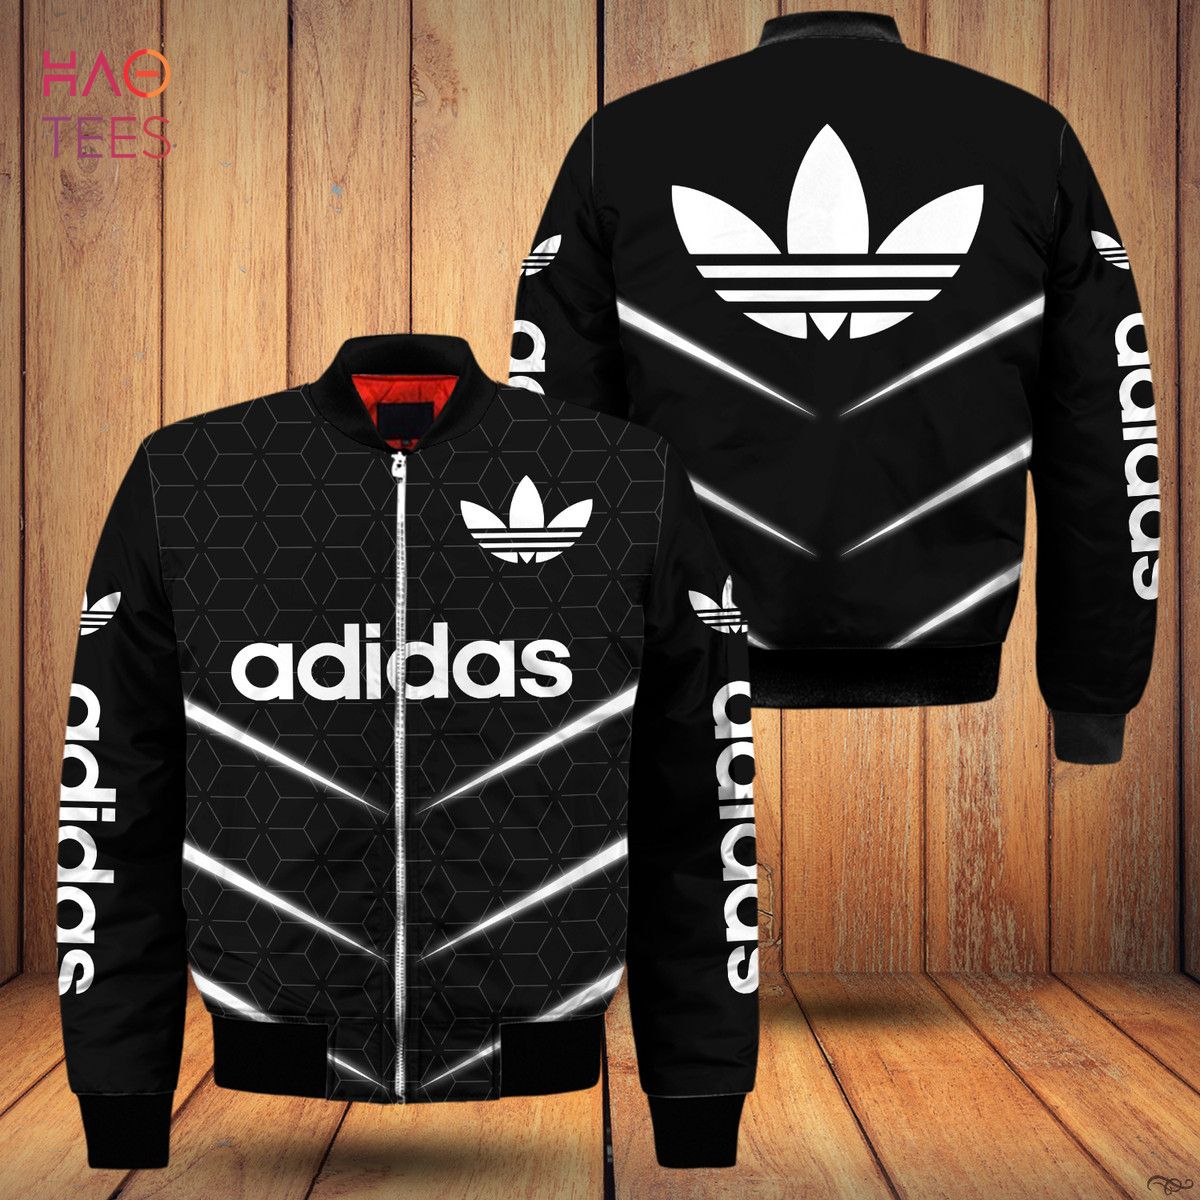 AVAILABLE Adidas Full Printing Luxury Brand Jacket Limited Edition